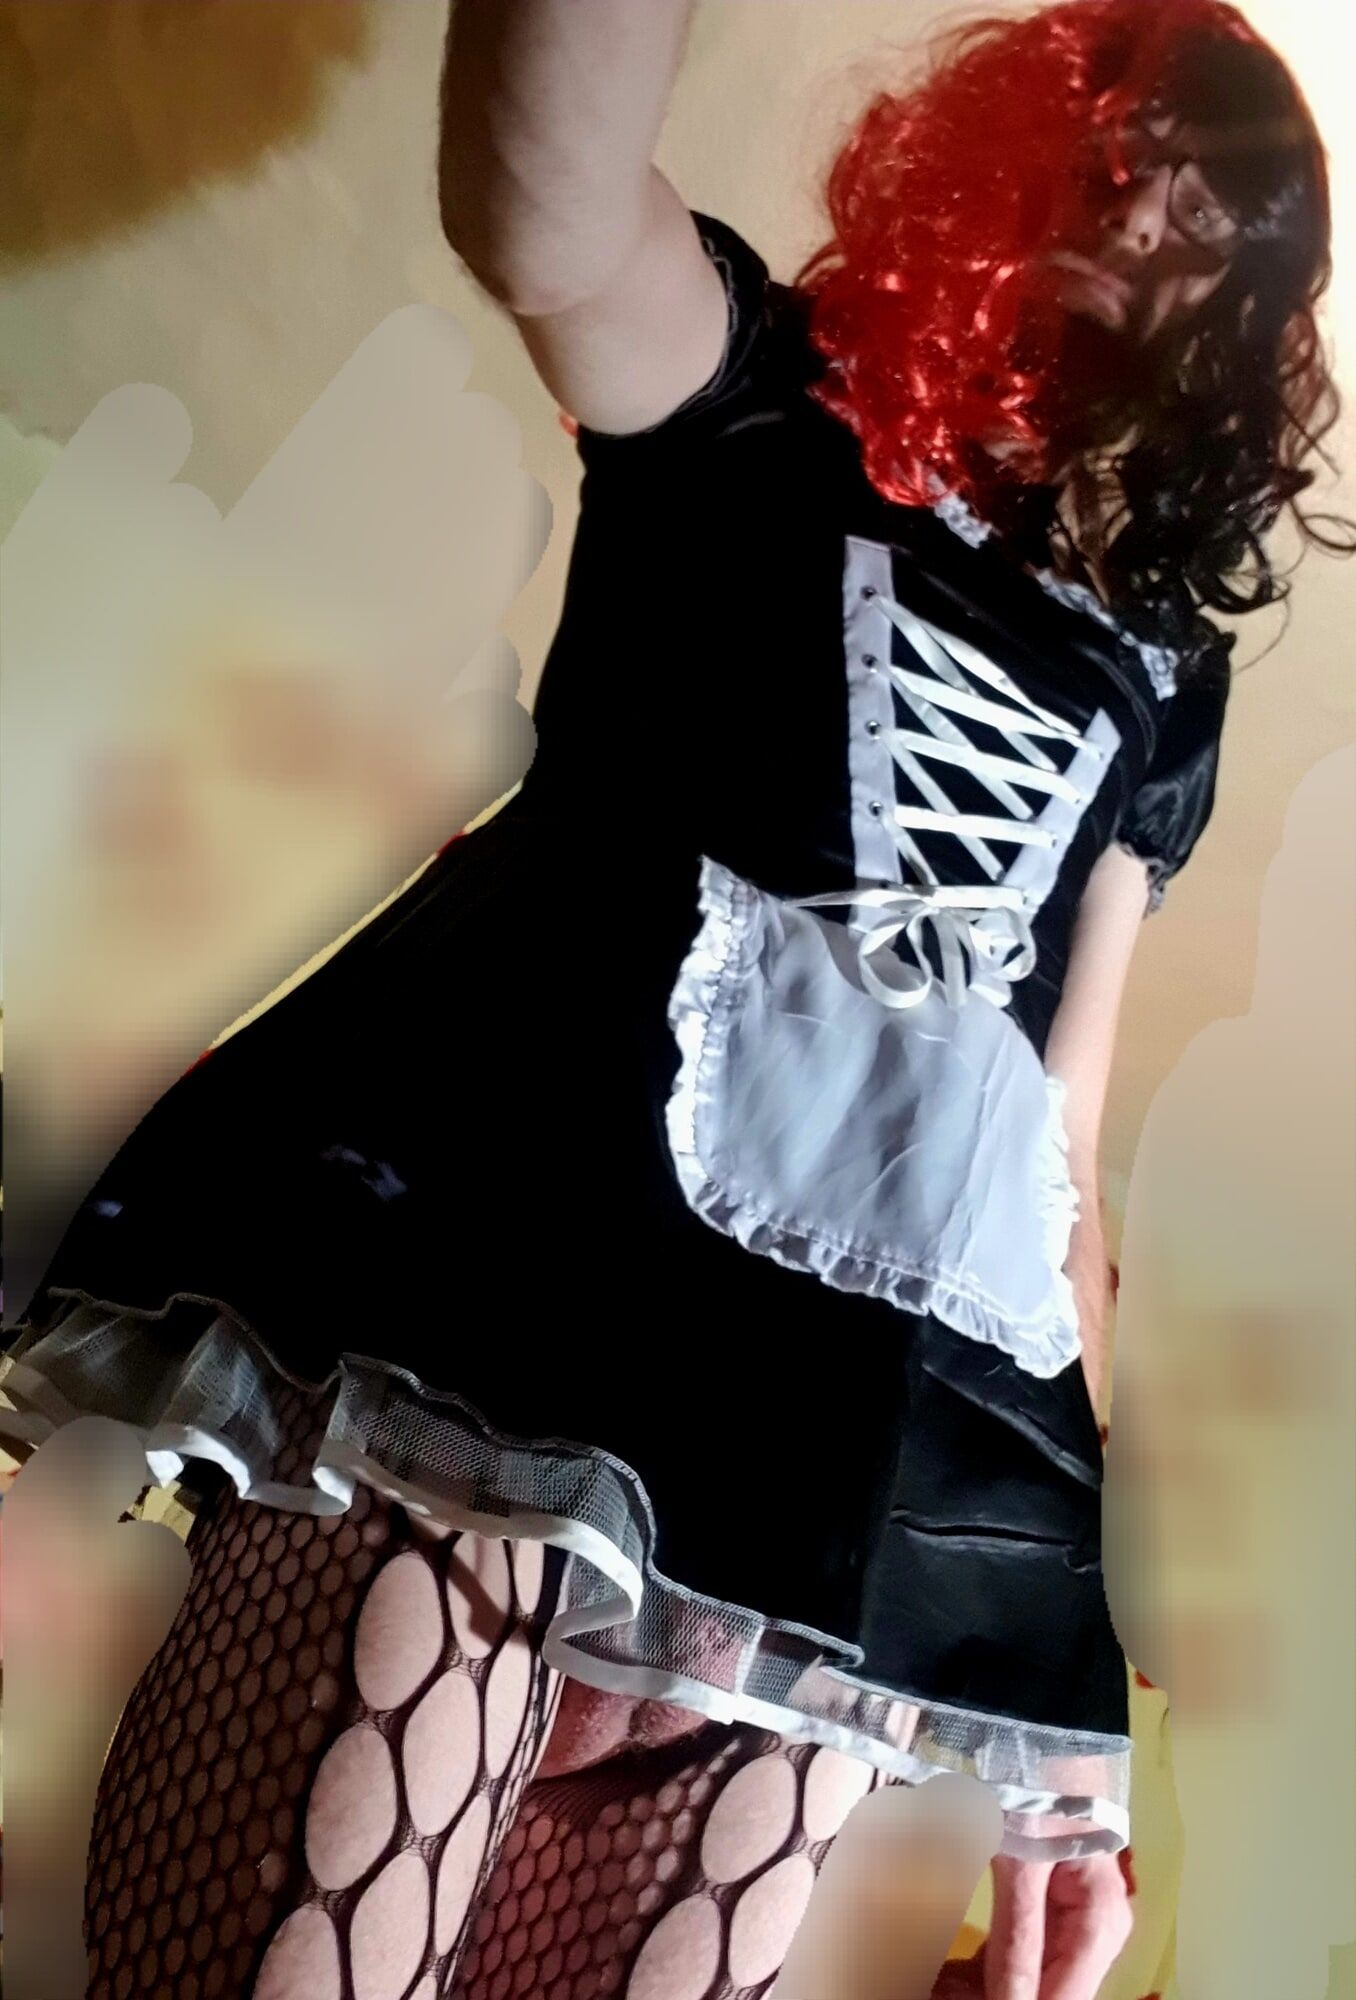 Slutty whore Maid dress outfit #10